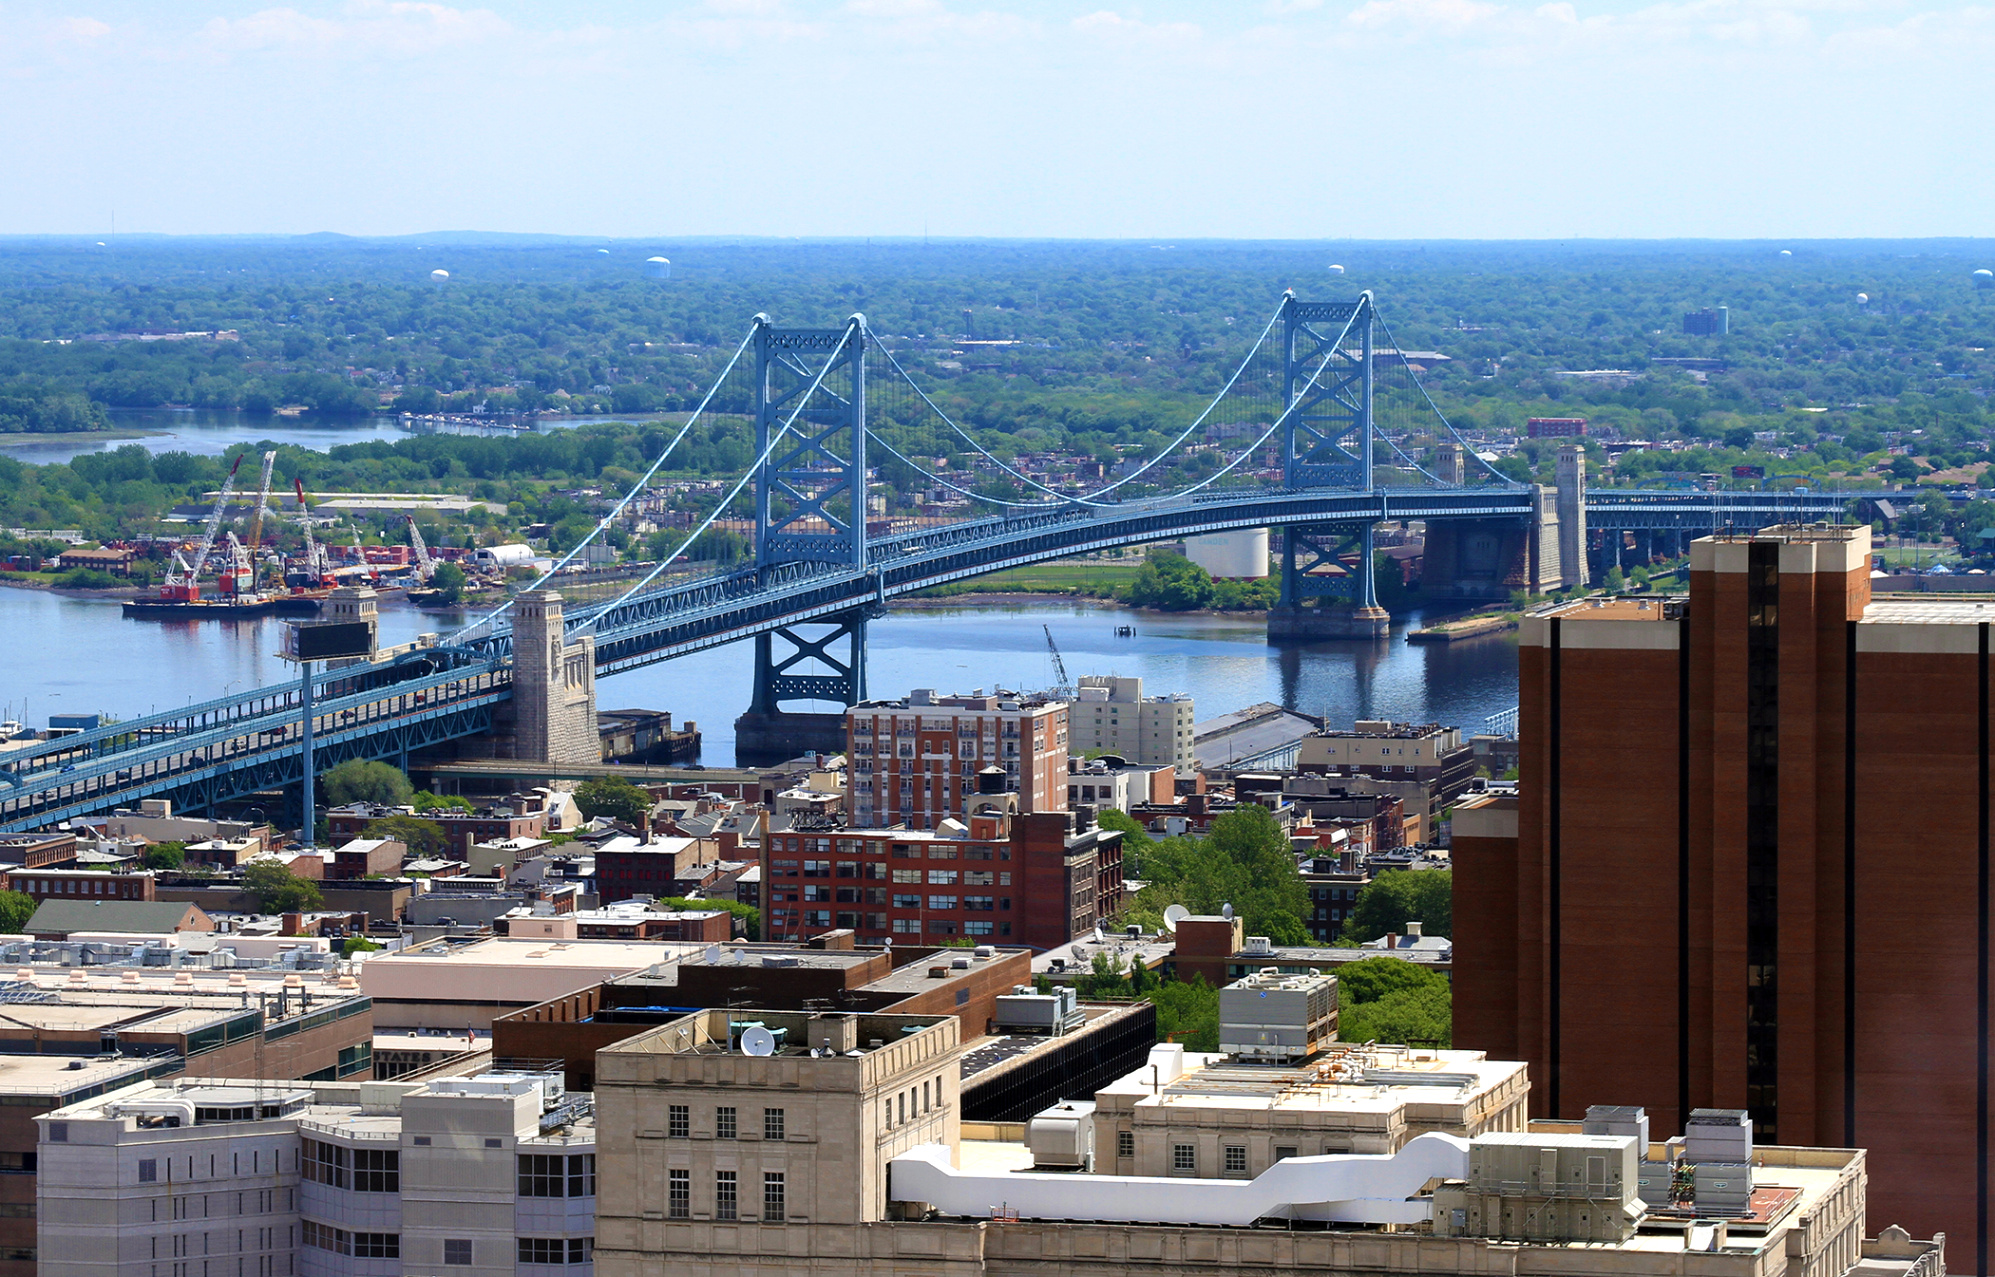 Cheap Vpn In Camden Nj Dans Home Prices: 10 Cities with the Worst Post-crash Recoveries Money